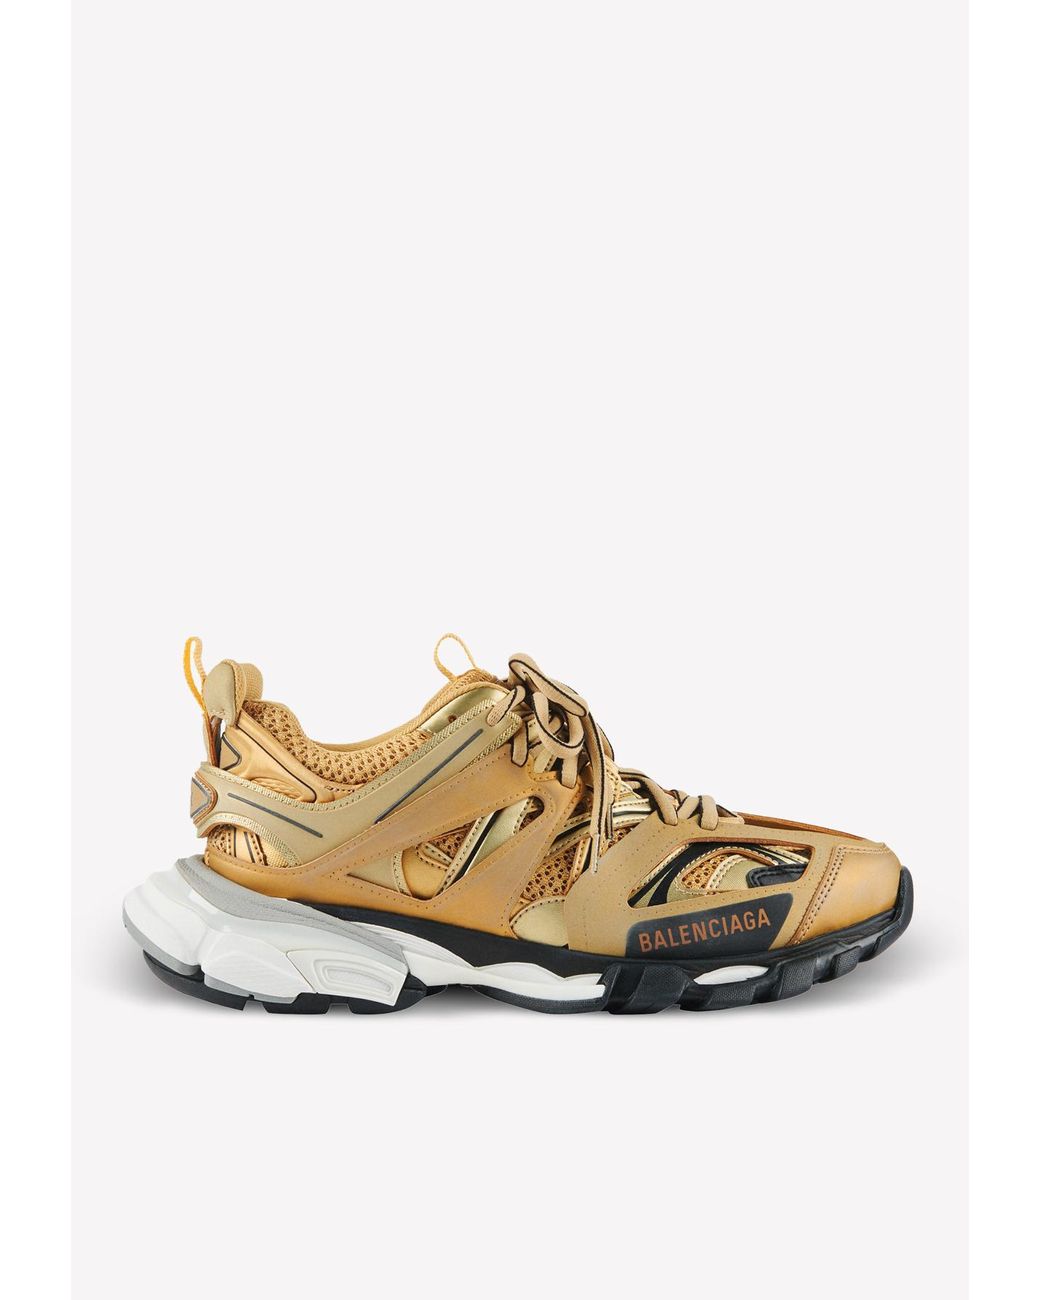 Balenciaga Synthetic Track Sneaker in Gold (Metallic) - Save 36% - Lyst